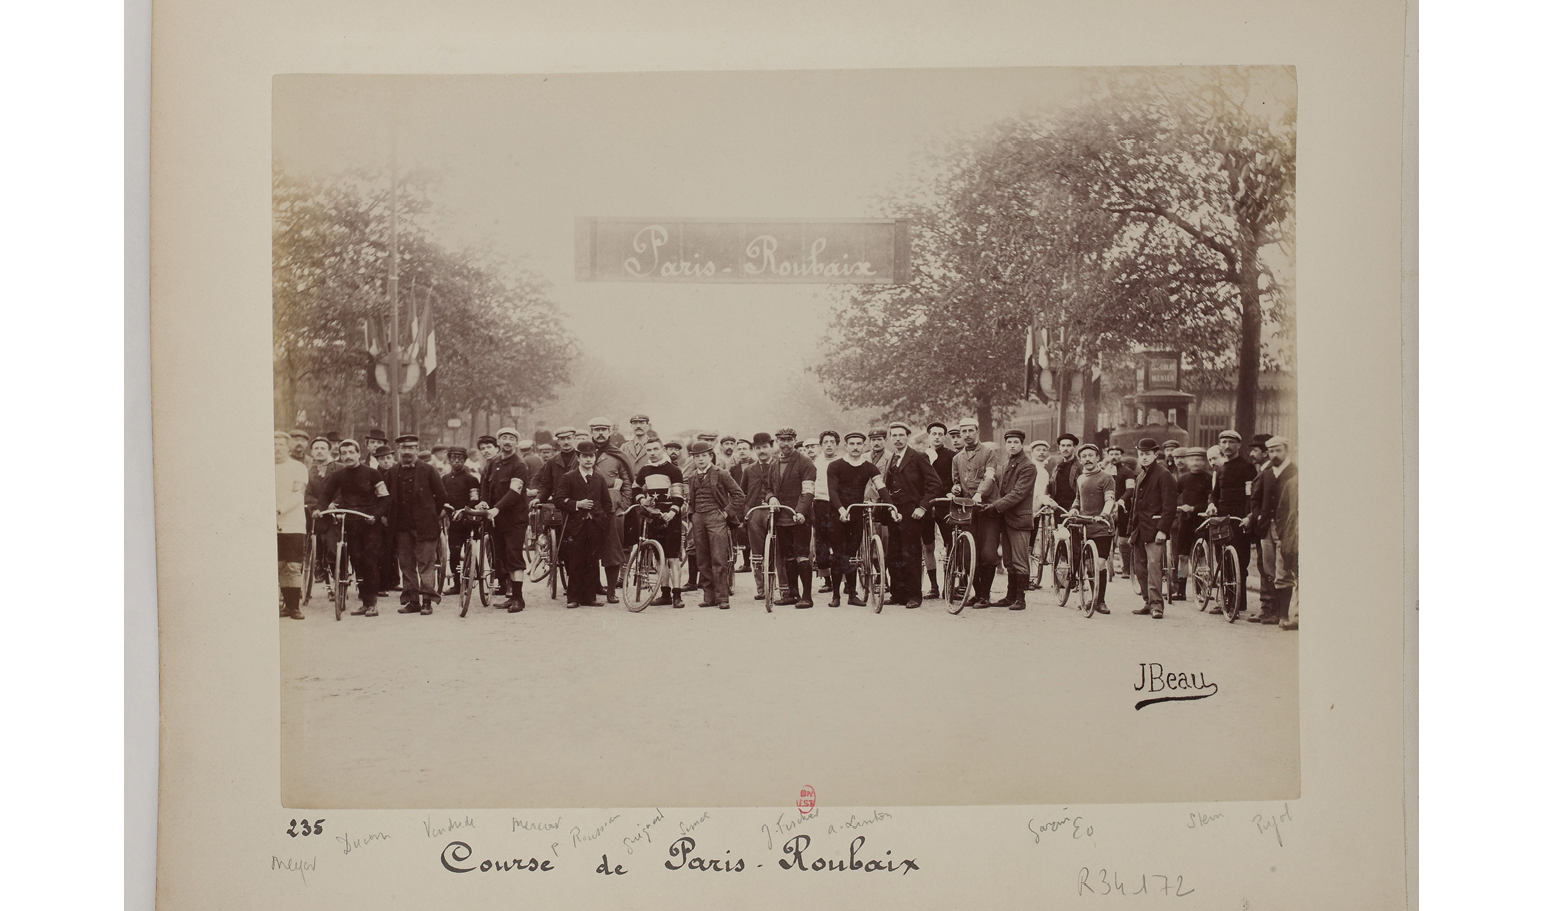 A black and white photograph from 1896: shows participants of the Paris-Roubaix cycle lining up at the starting line; in the background, trees on each side of the road and a banner written â€œParis-Roubaixâ€�; at the bottom, a handwritten inscription reading â€œCourse de Paris-Roubaixâ€�.